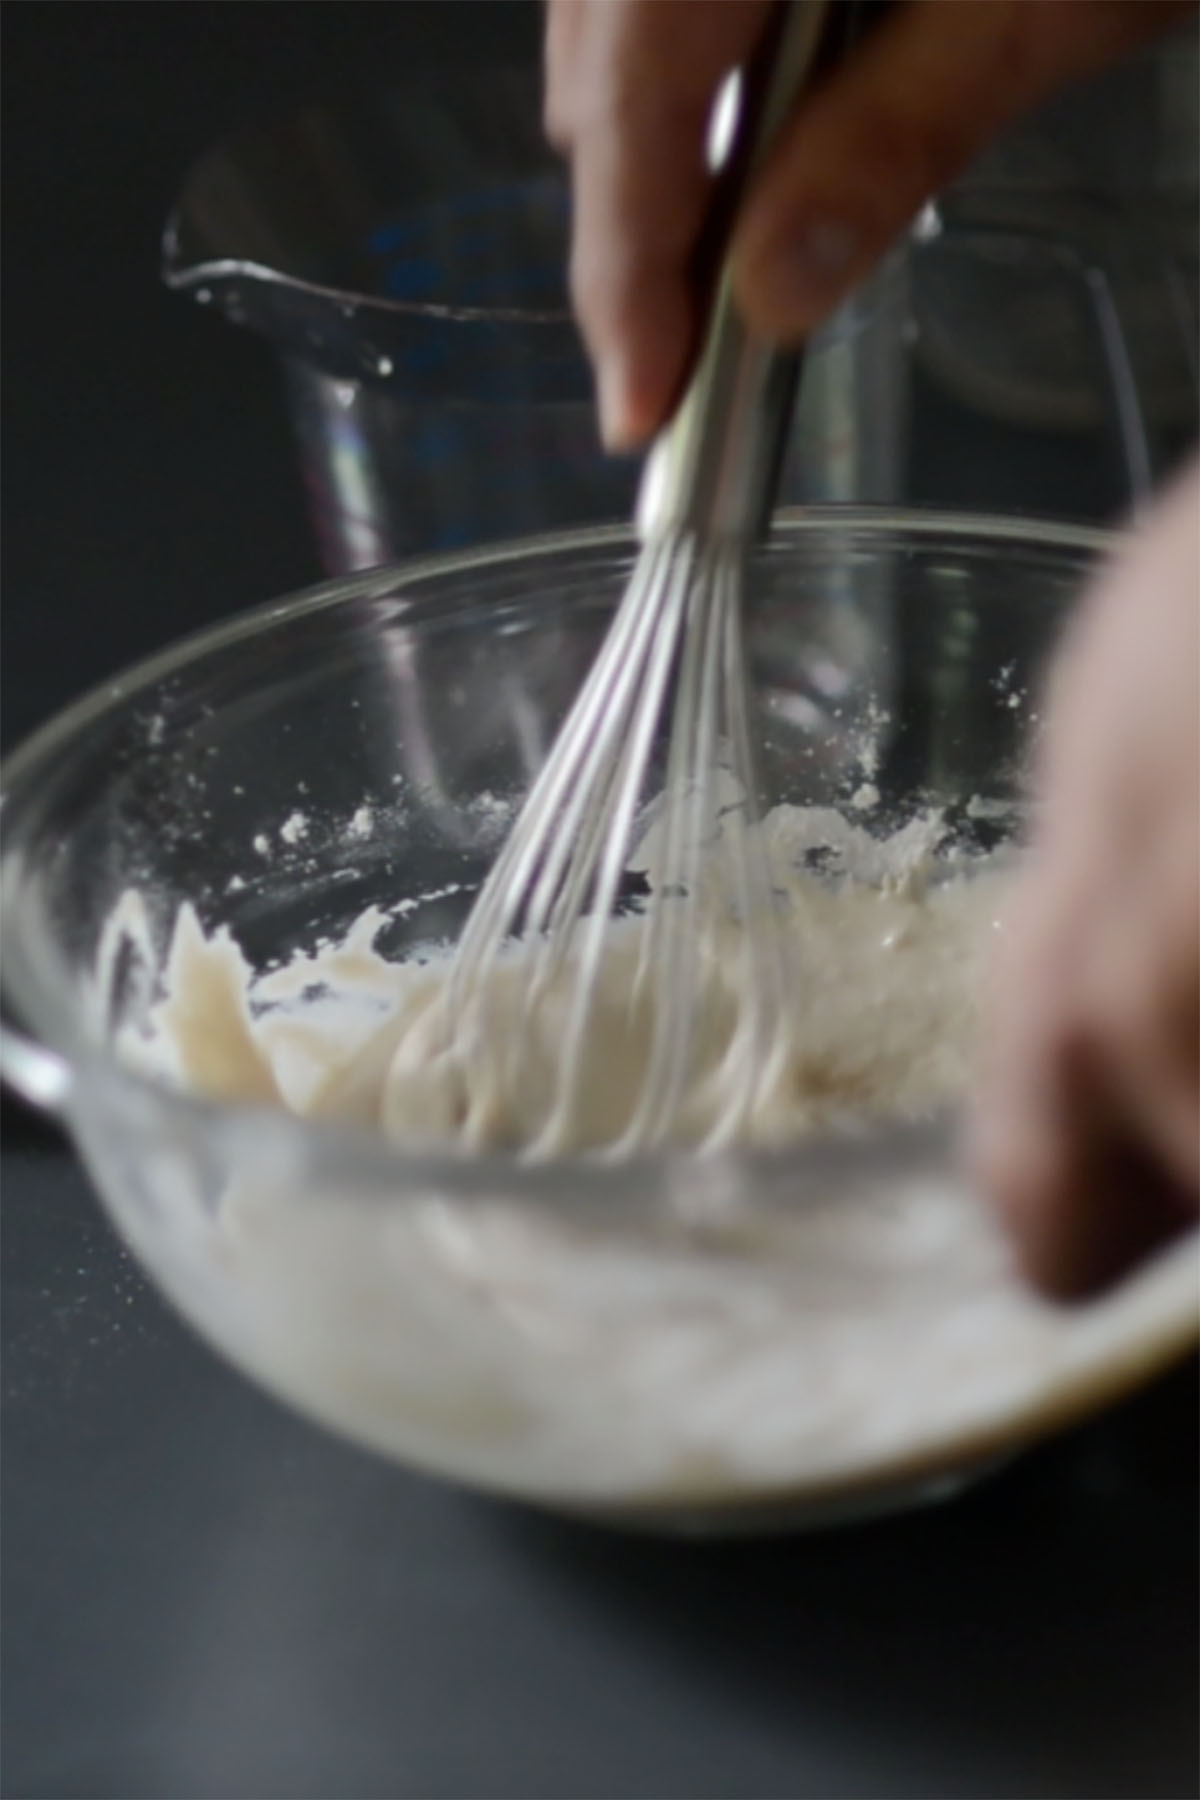 Bread starter being whisked in a glass mixing bowl.